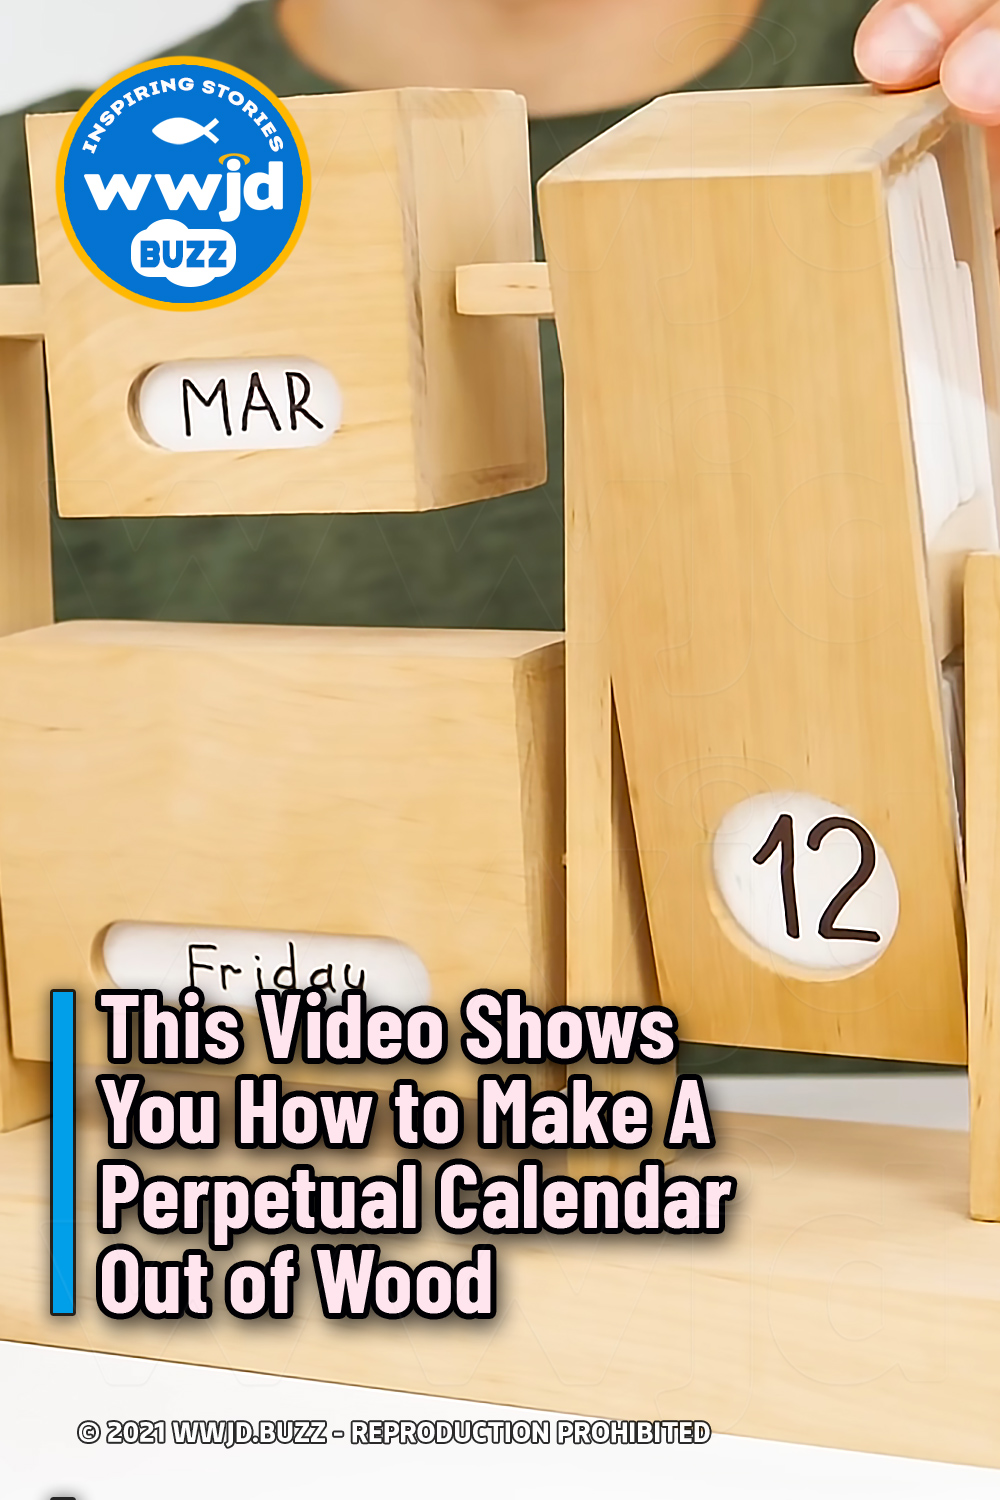 This Video Shows You How to Make A Perpetual Calendar Out of Wood